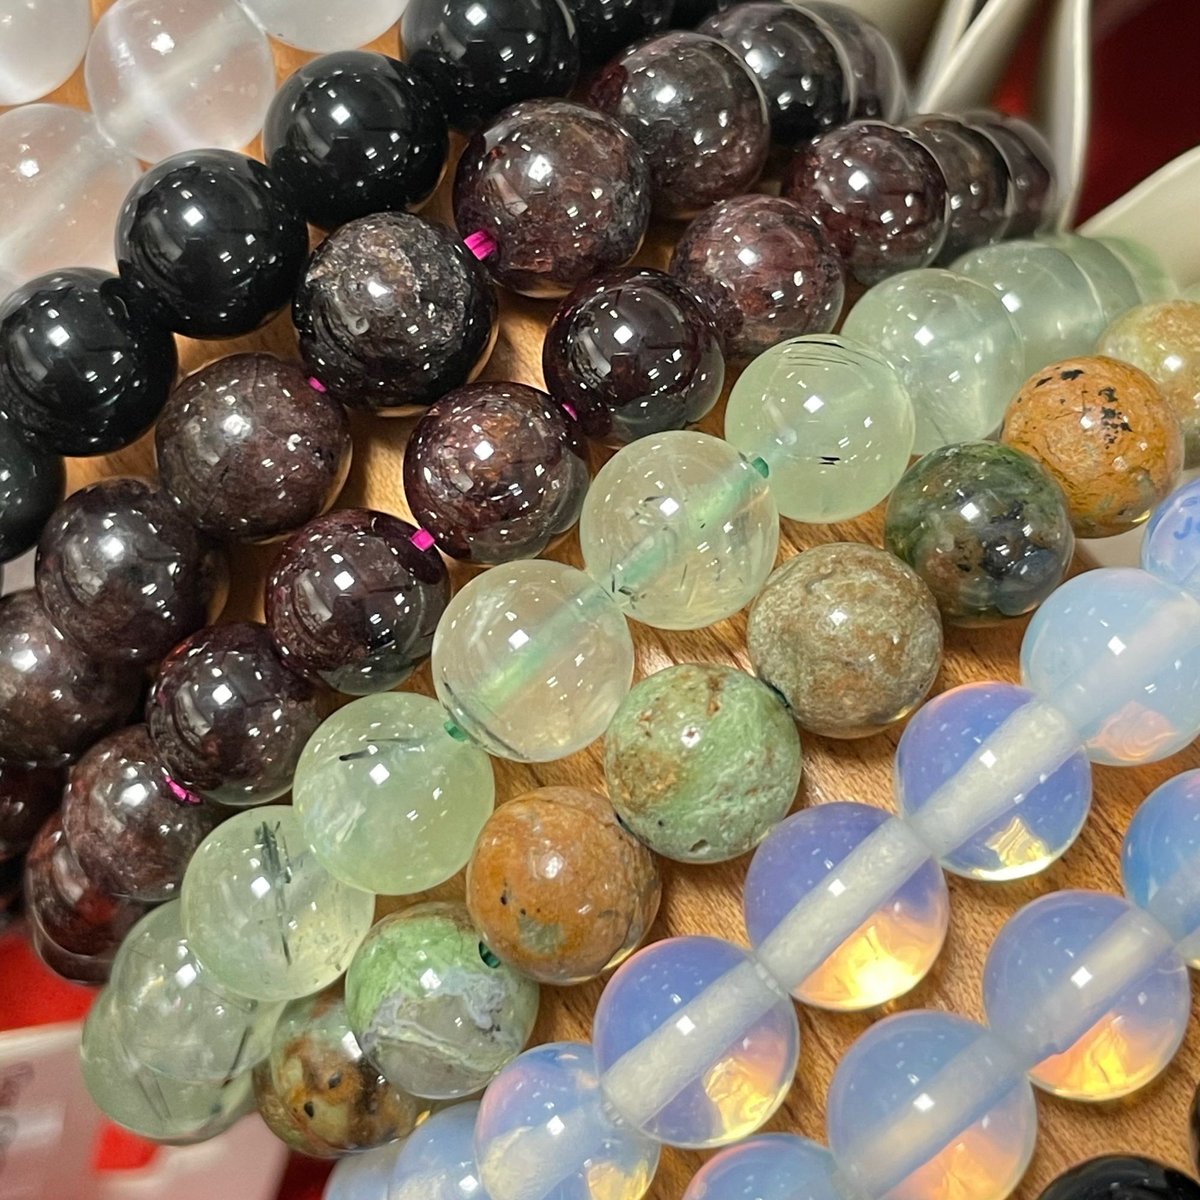 Big restock of bracelets this week. Beads, chips and tumbled. Shipping starts at $5 or come by and see them in person. #amythest #clearquartz #garbet #chakra #whitejade #rosequartz #malachite #fluorite #selenite #prehnite #crystalbracelets #torontocrystals #crystalshop